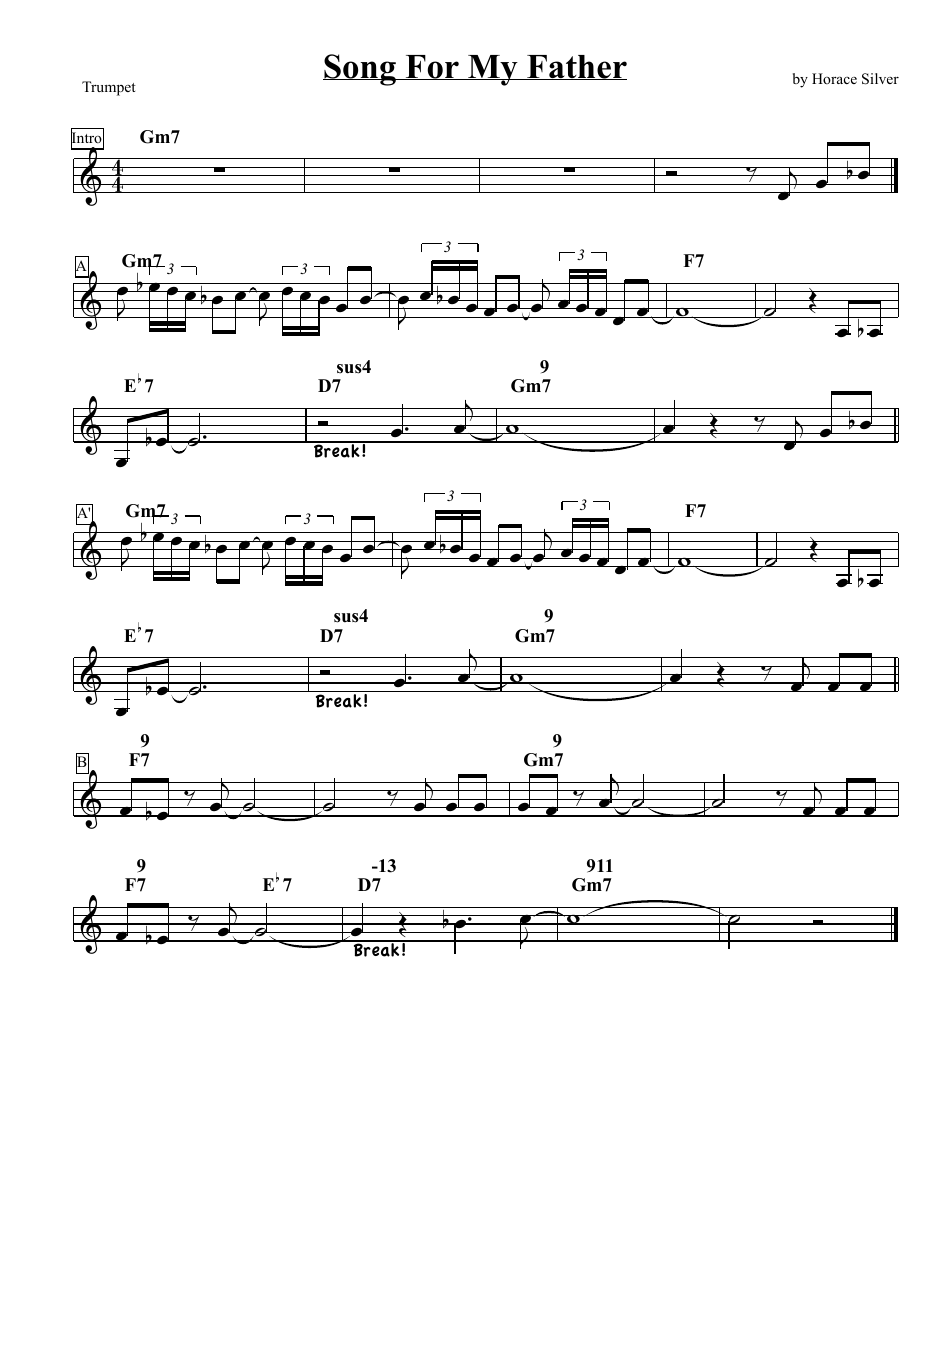 Horace Silver - Song for My Father Trumpet sheet music preview image